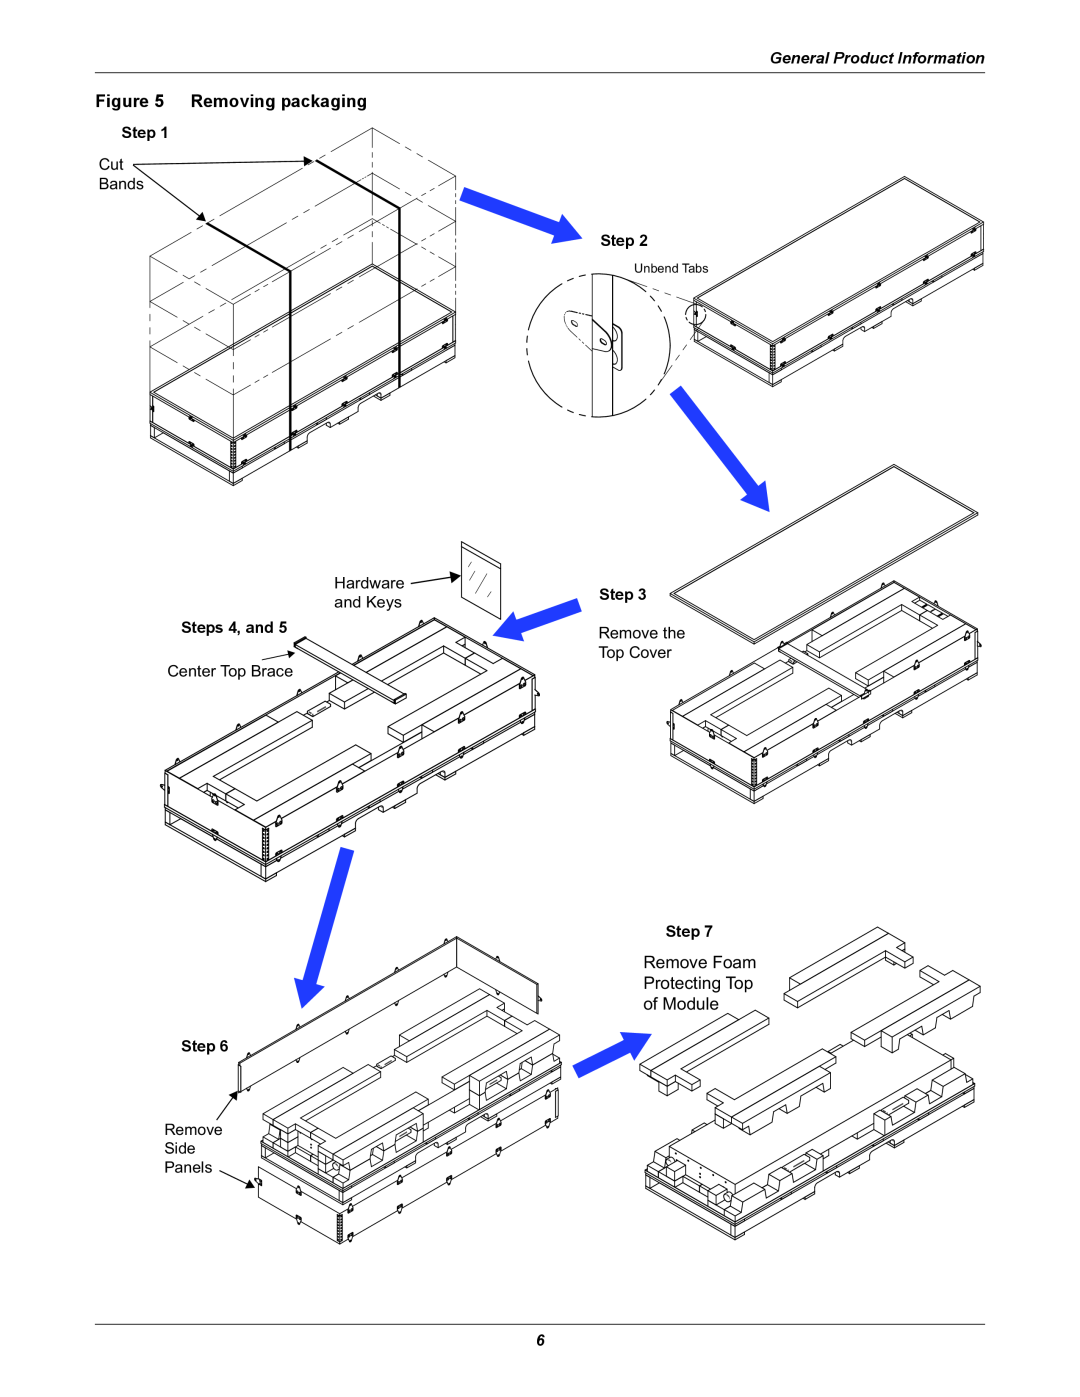 Emerson XDR user manual Removing packaging, Remove Foam Protecting Top of Module, General Product Information, Unbend Tabs 